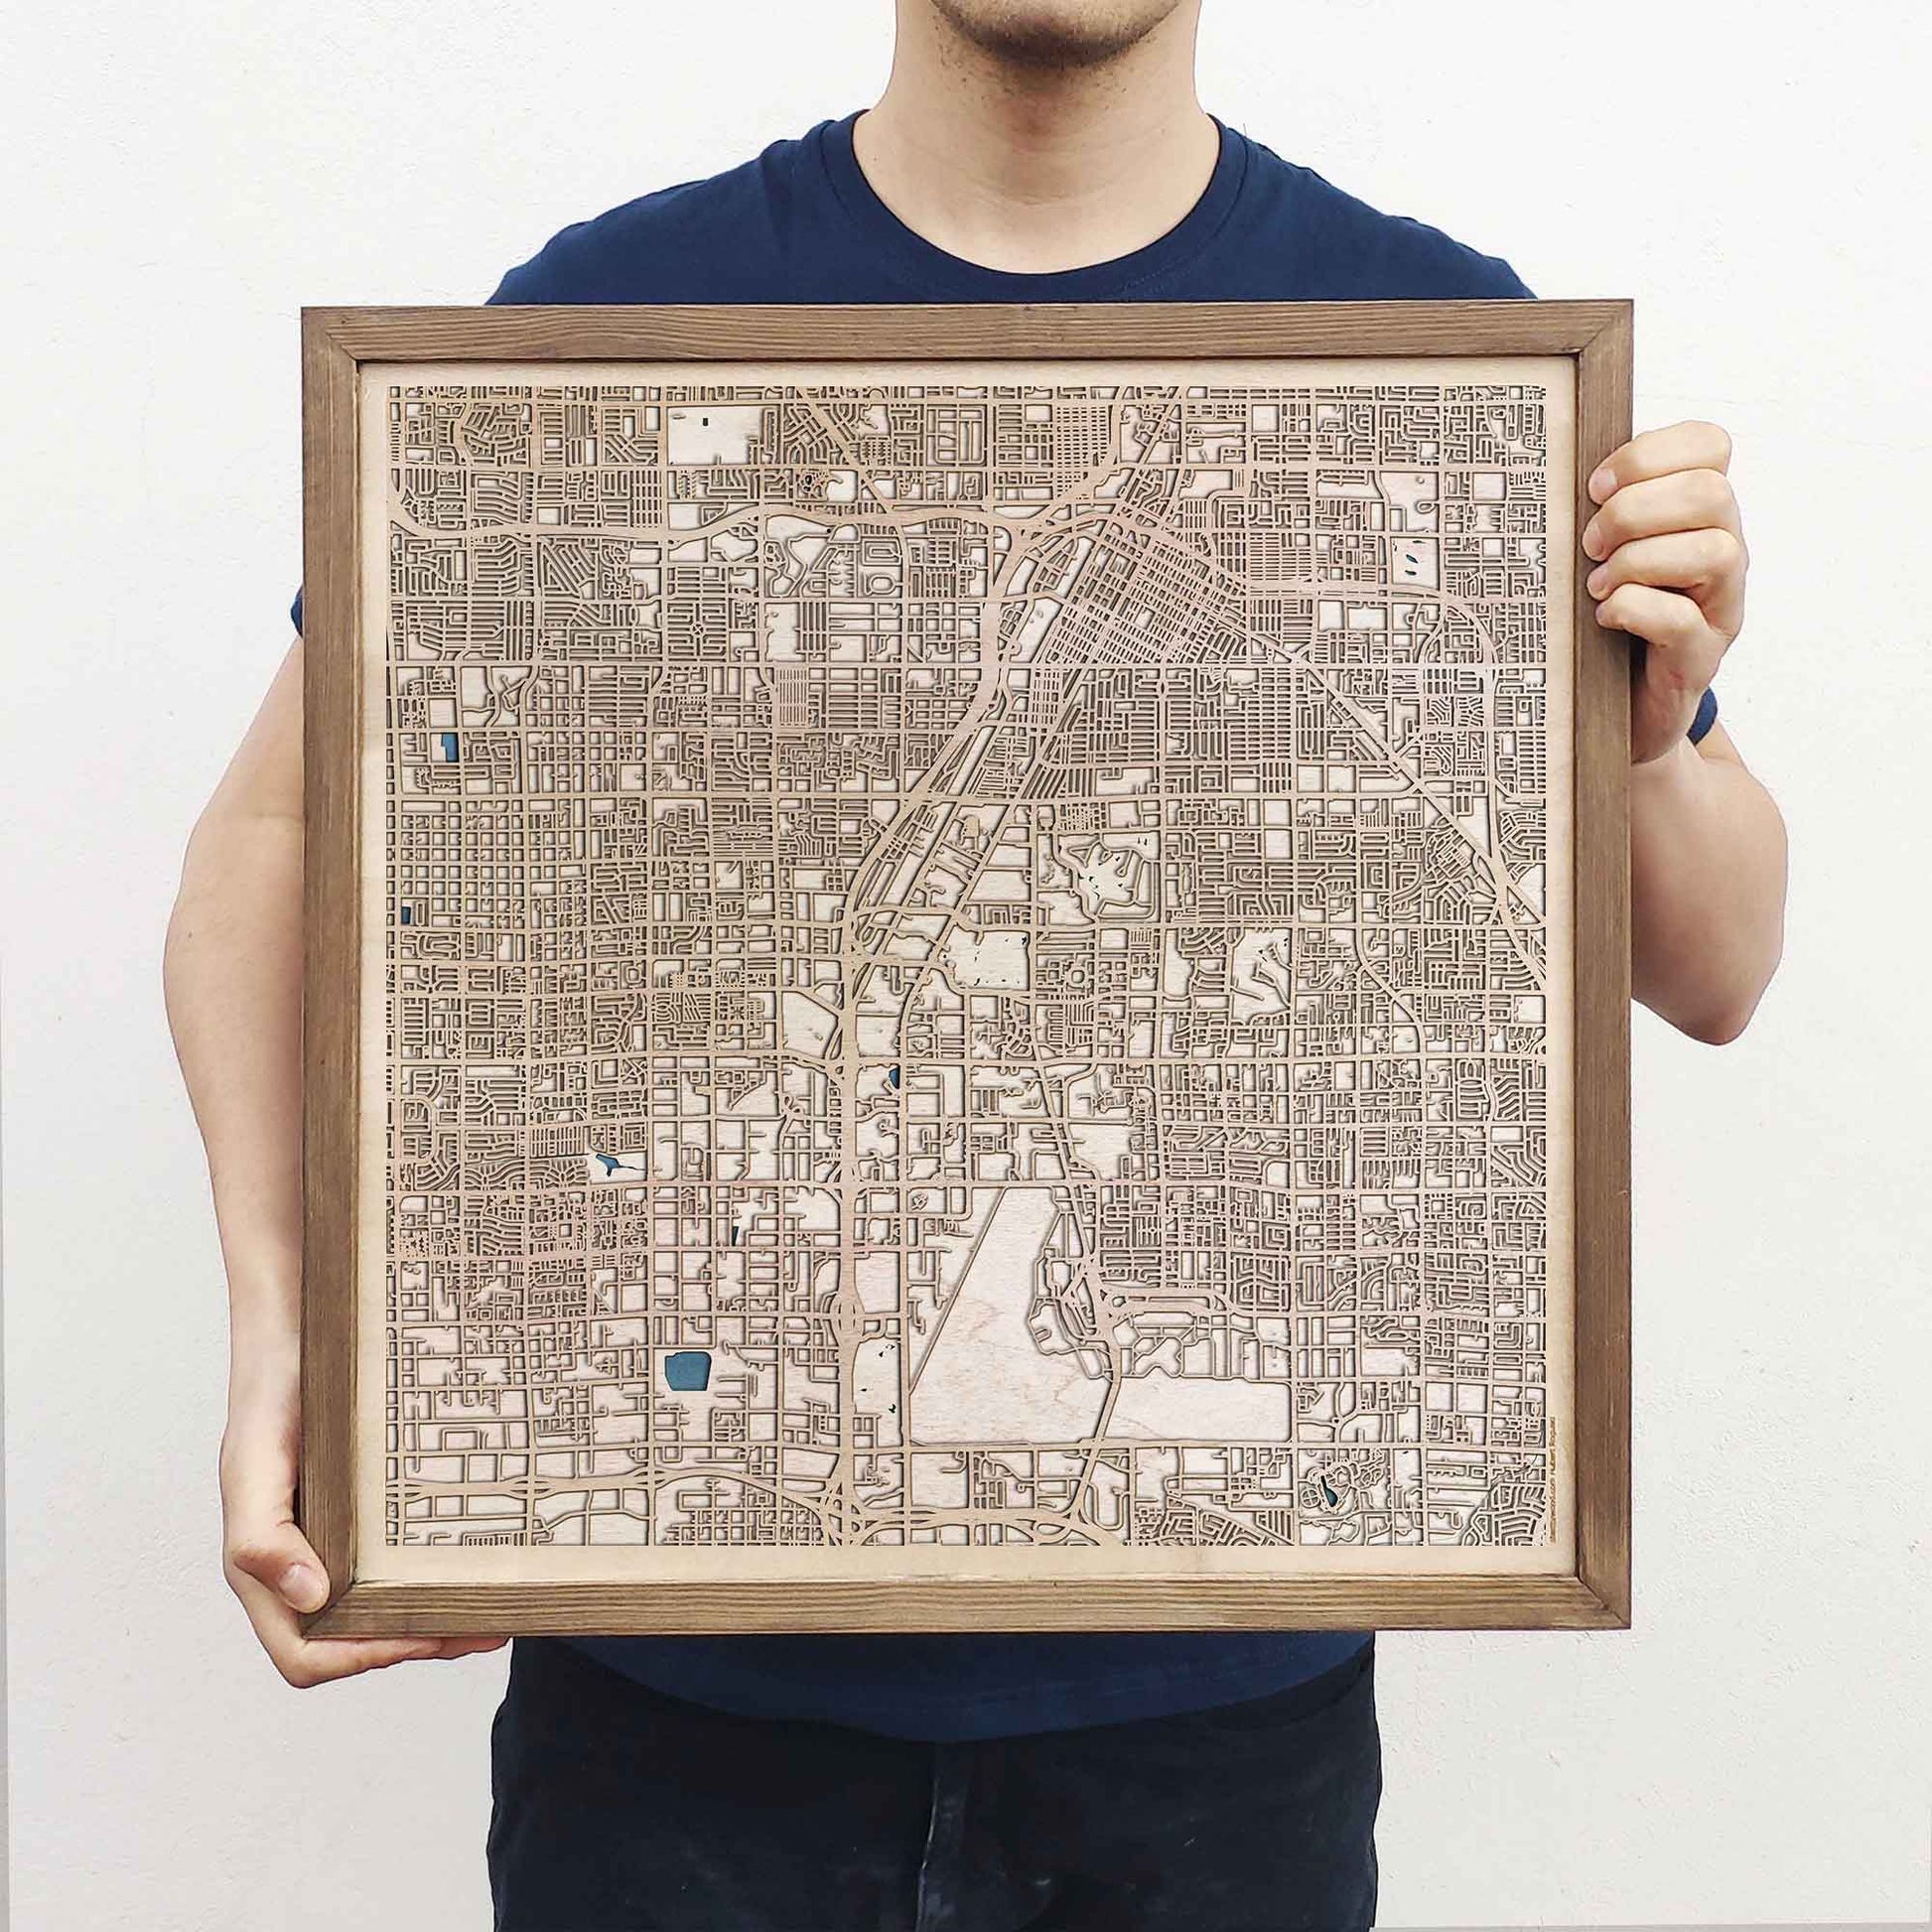 Las Vegas Wooden Map by CityWood - Custom Wood Map Art - Unique Laser Cut Engraved - Anniversary Gift